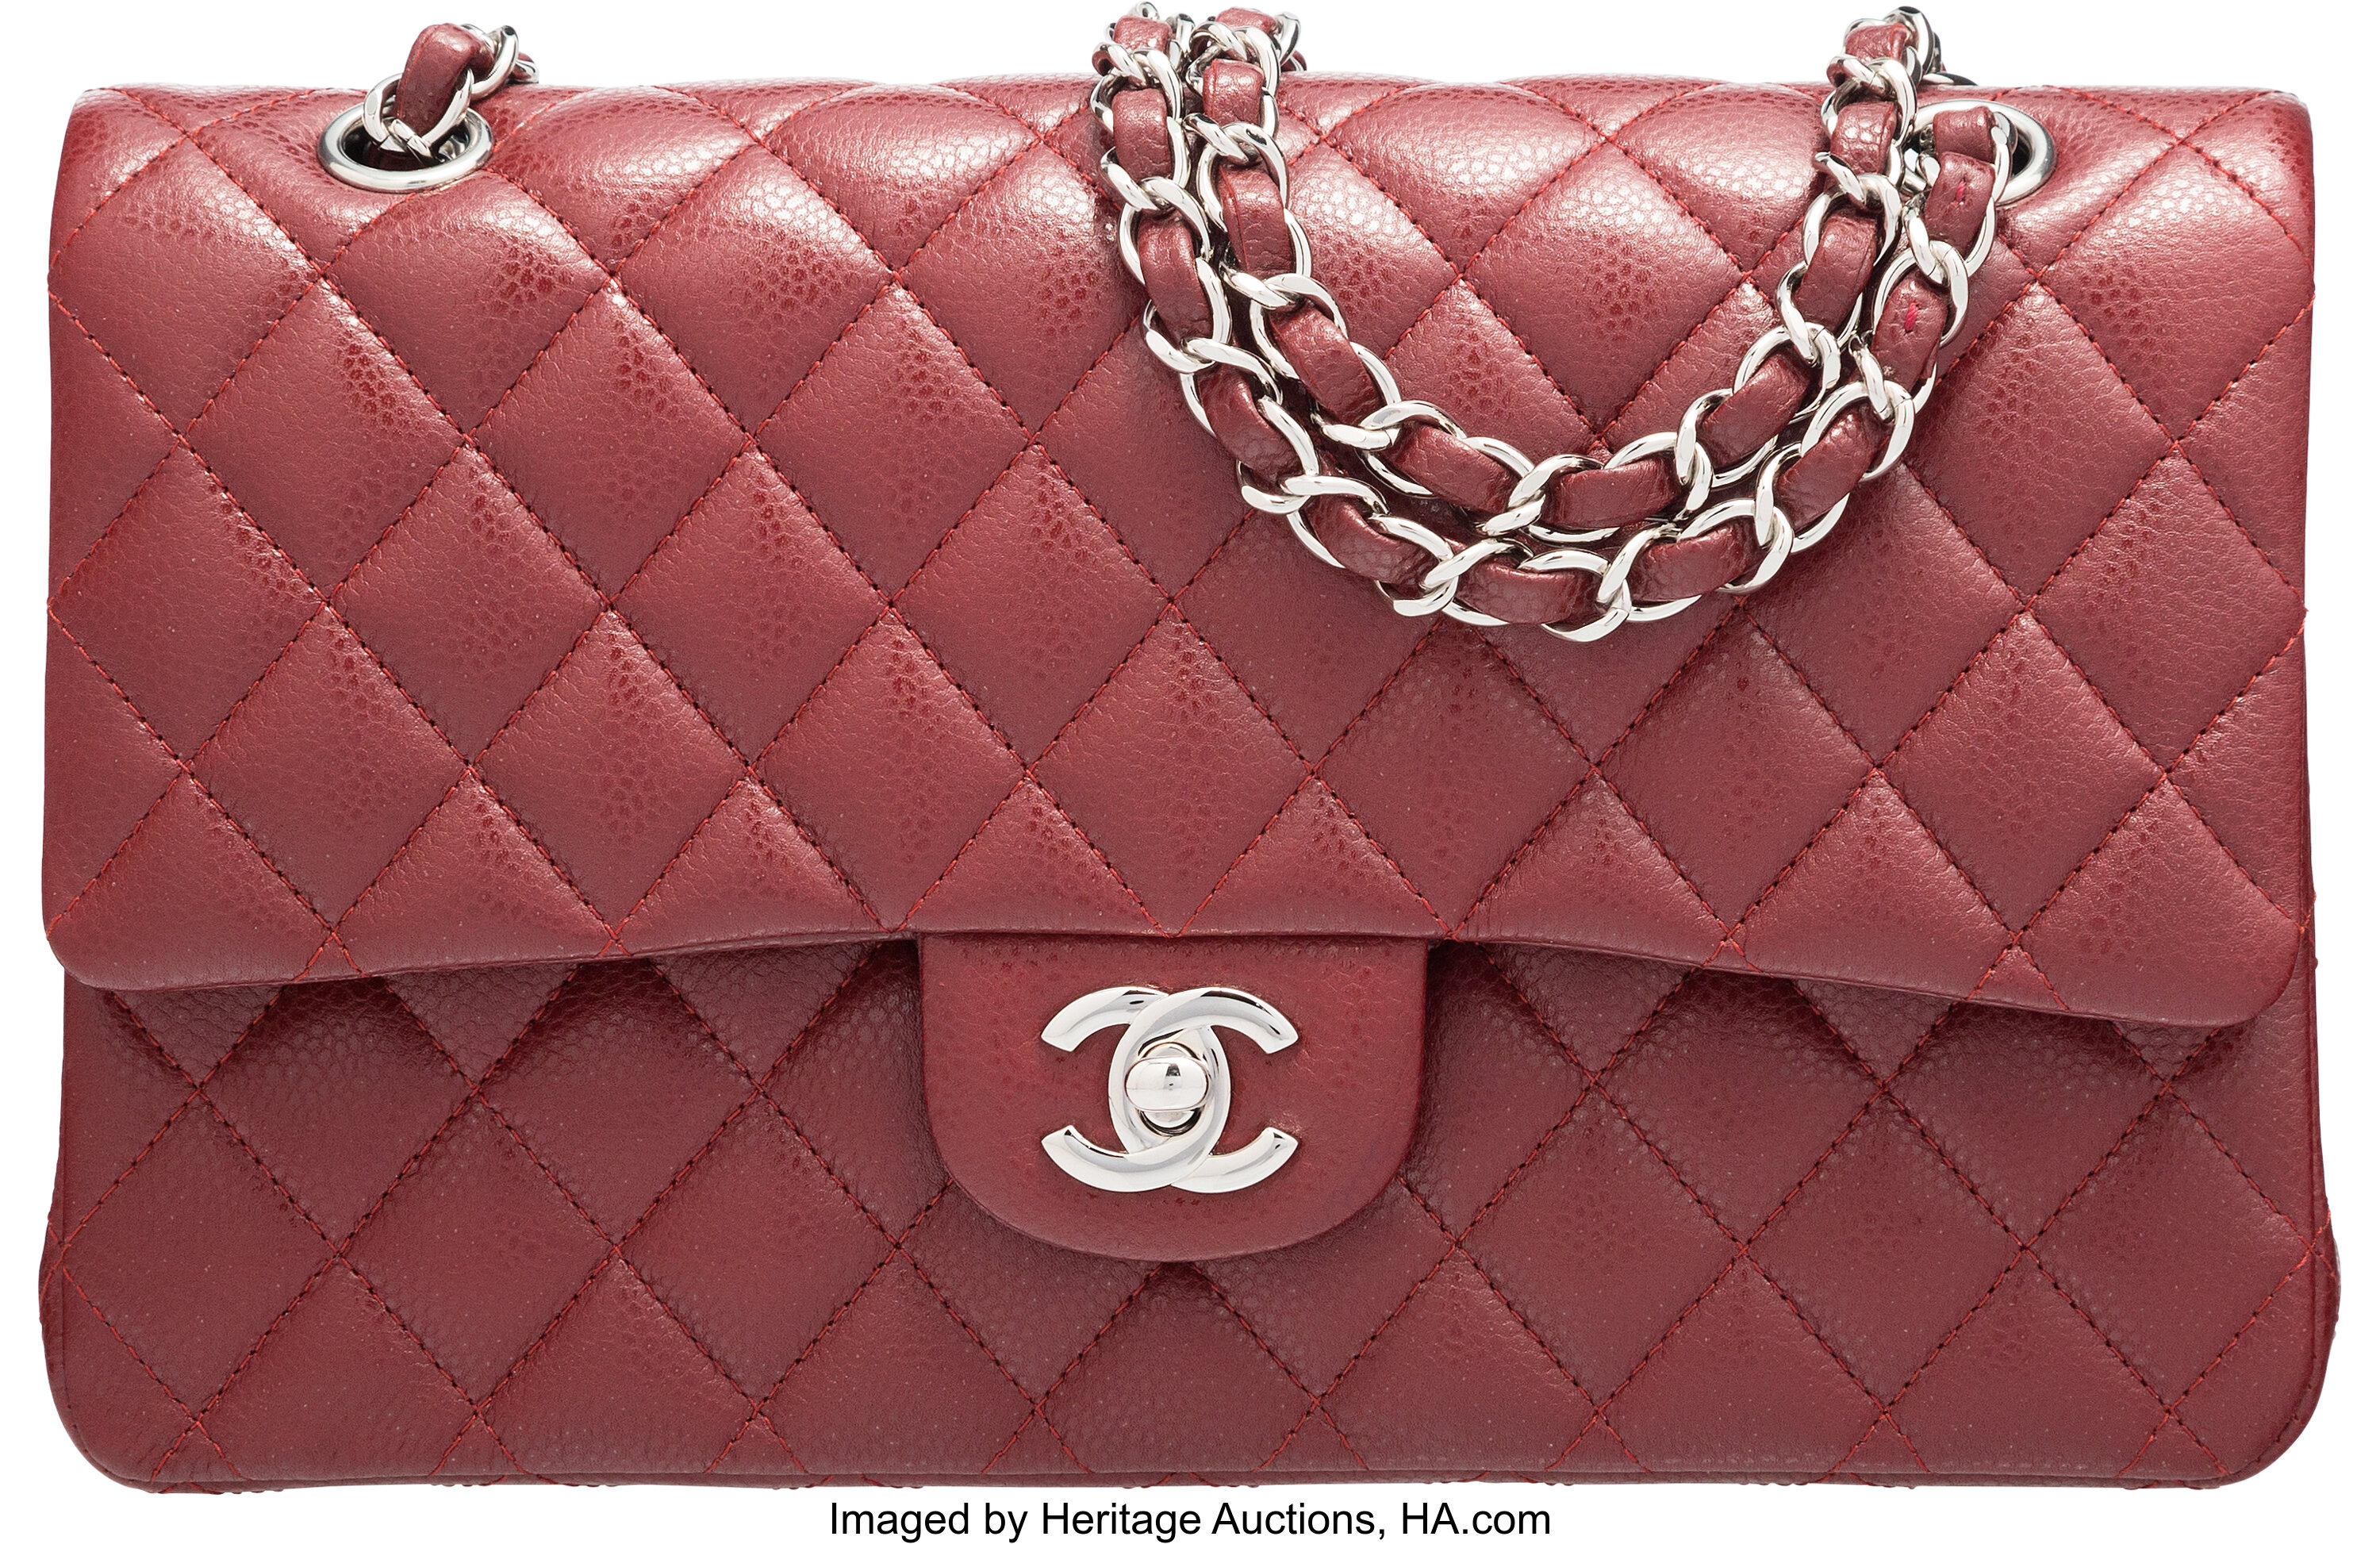 Chanel Burgundy Quilted Caviar Leather Medium Classic Double Flap